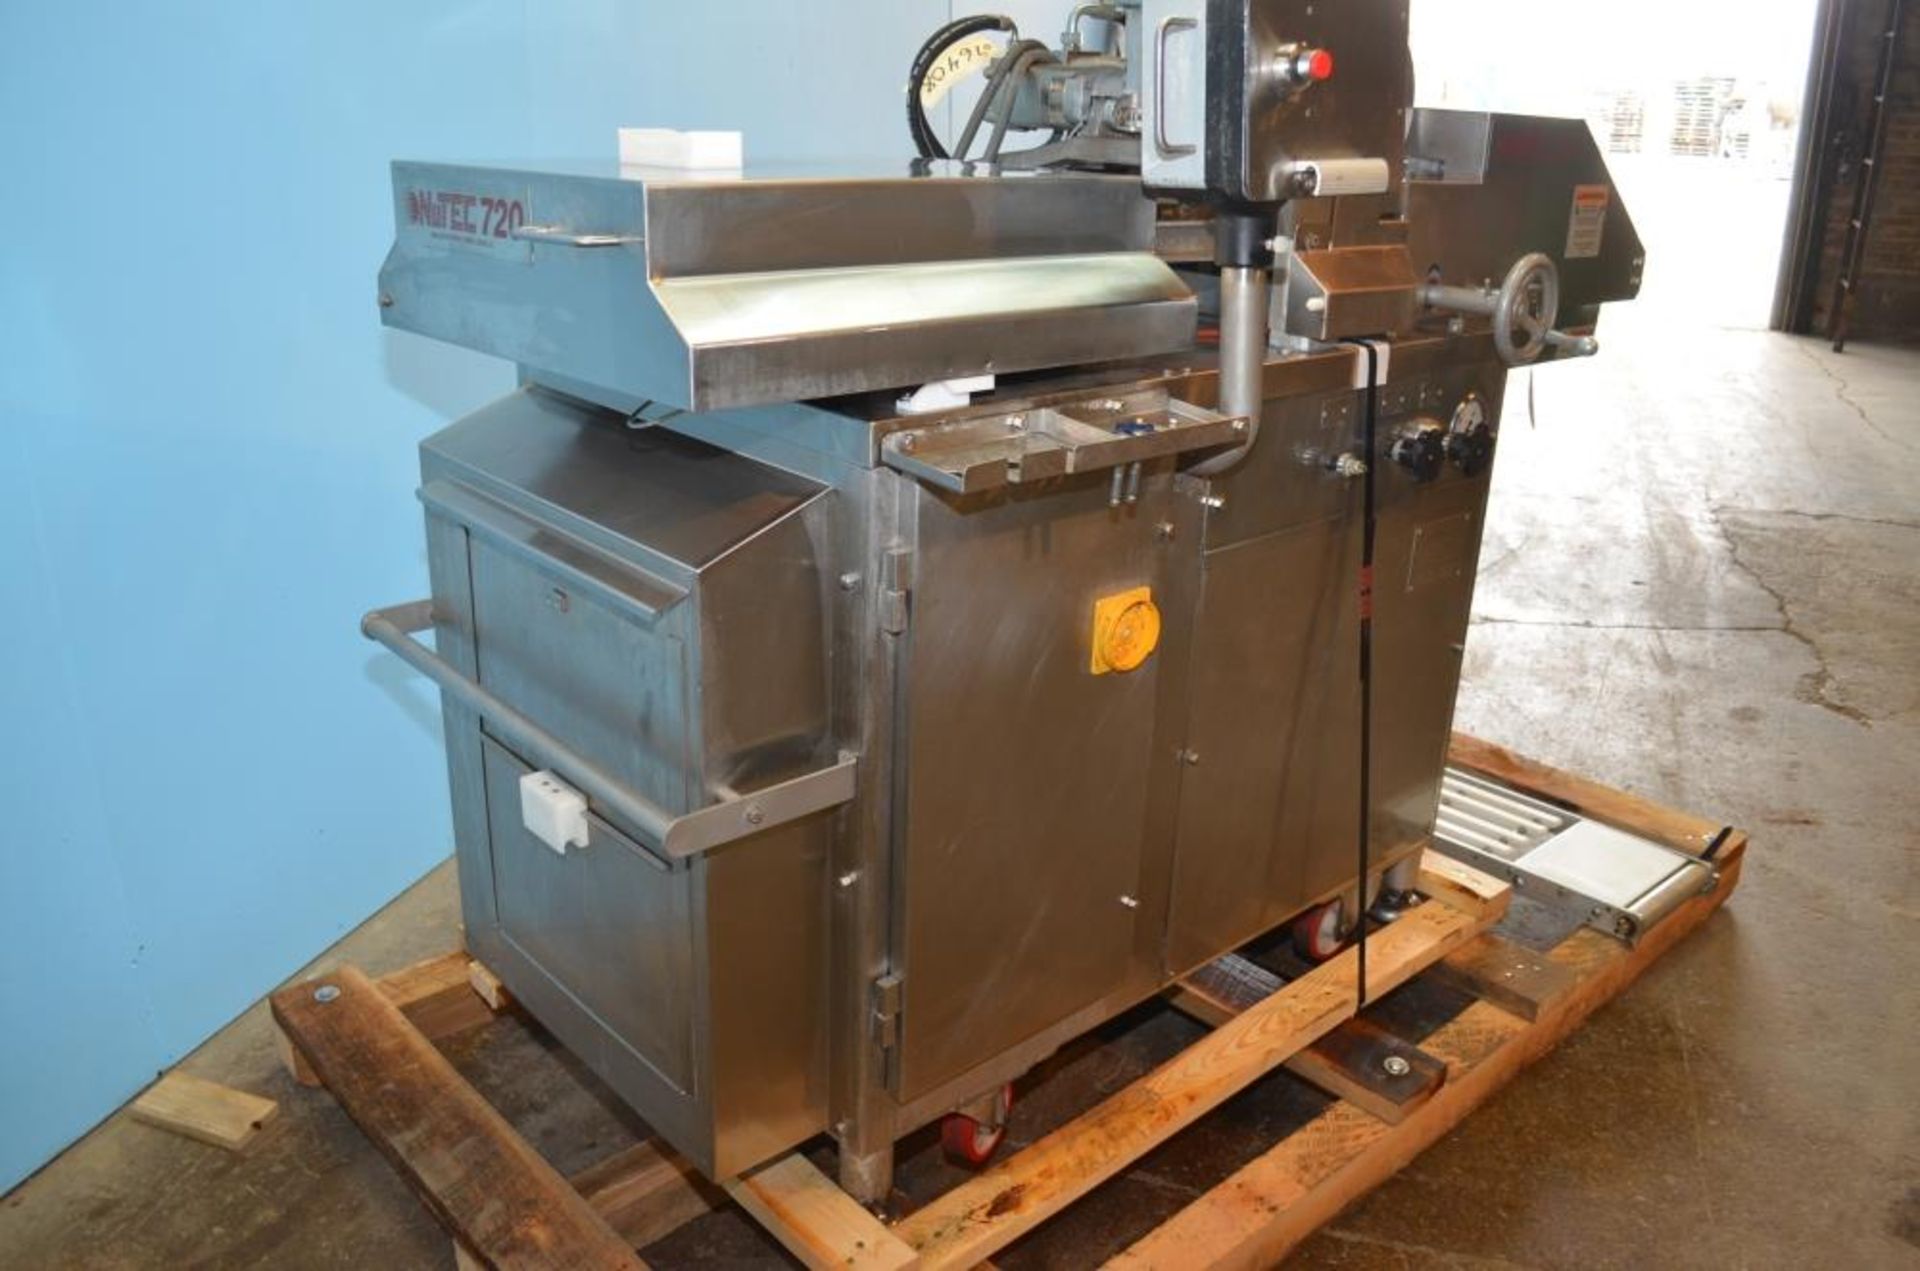 Nutec Mdl. 720 Portable Patty Forming Machine, hydraulic operation, vane pump forming station, 15-65 - Image 4 of 28